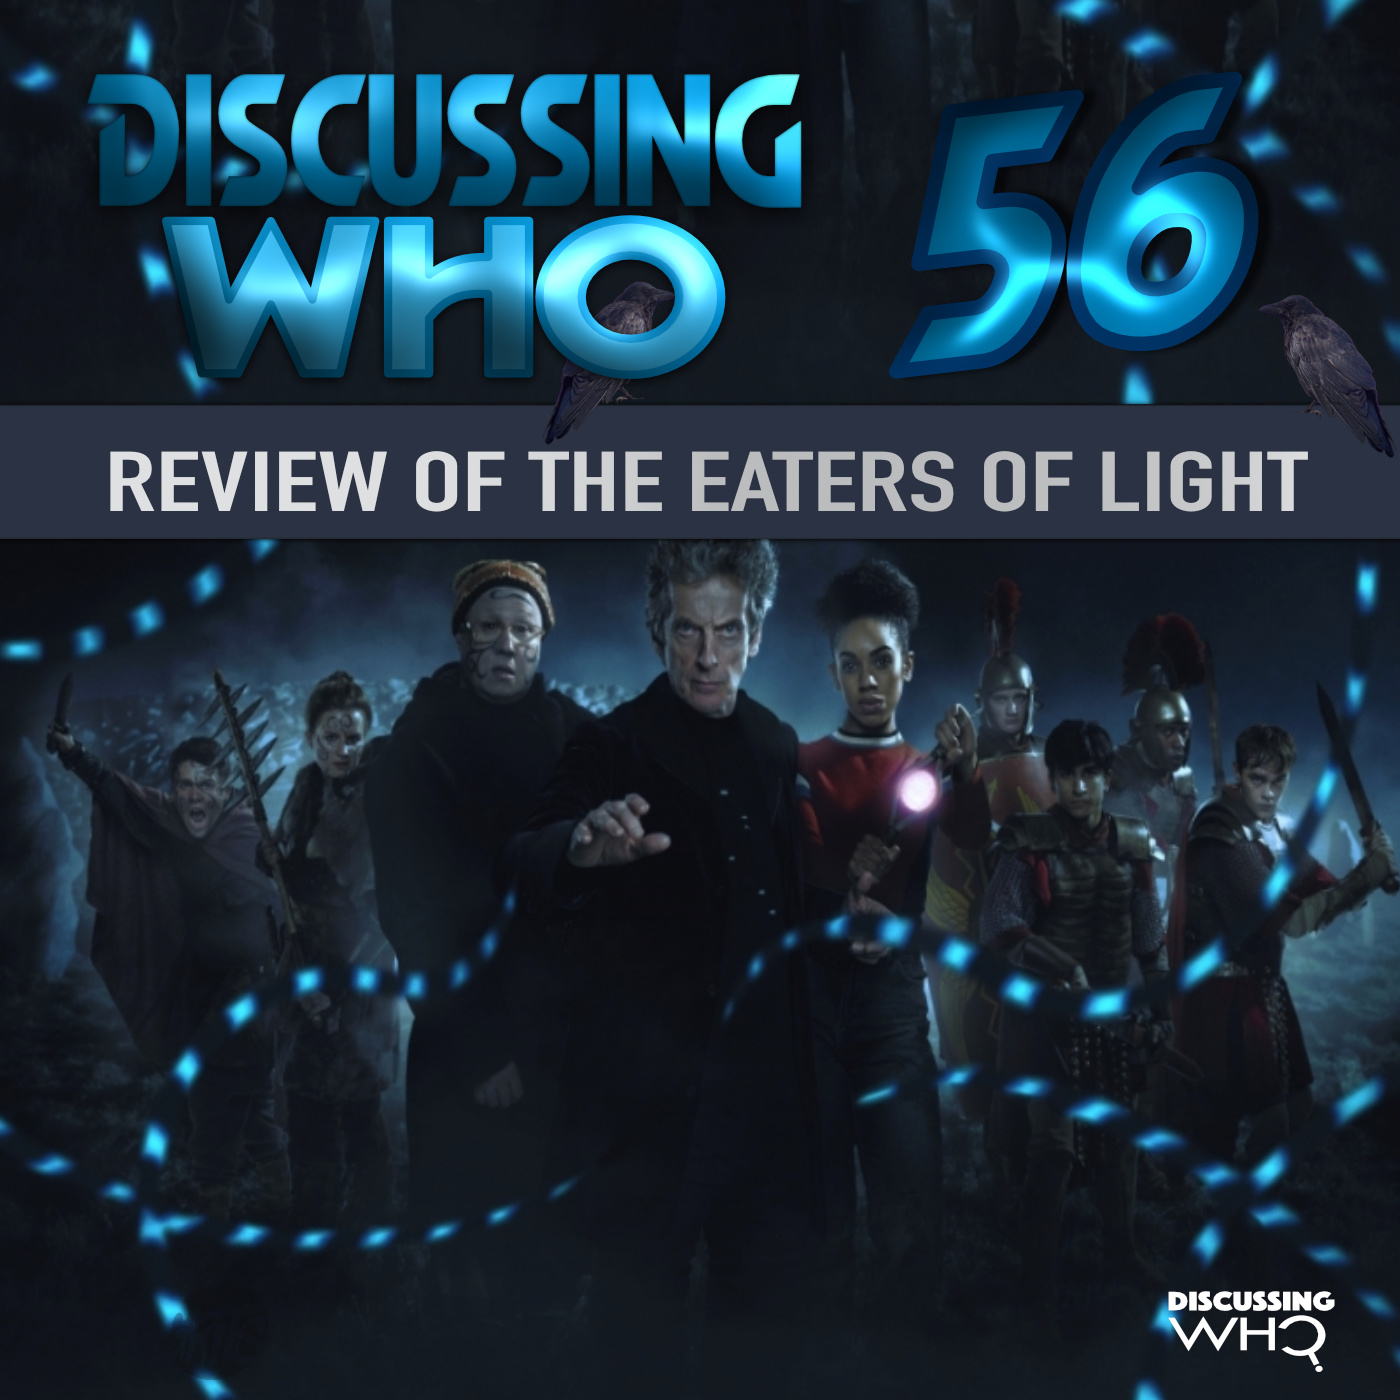 Review of the Eaters of Light